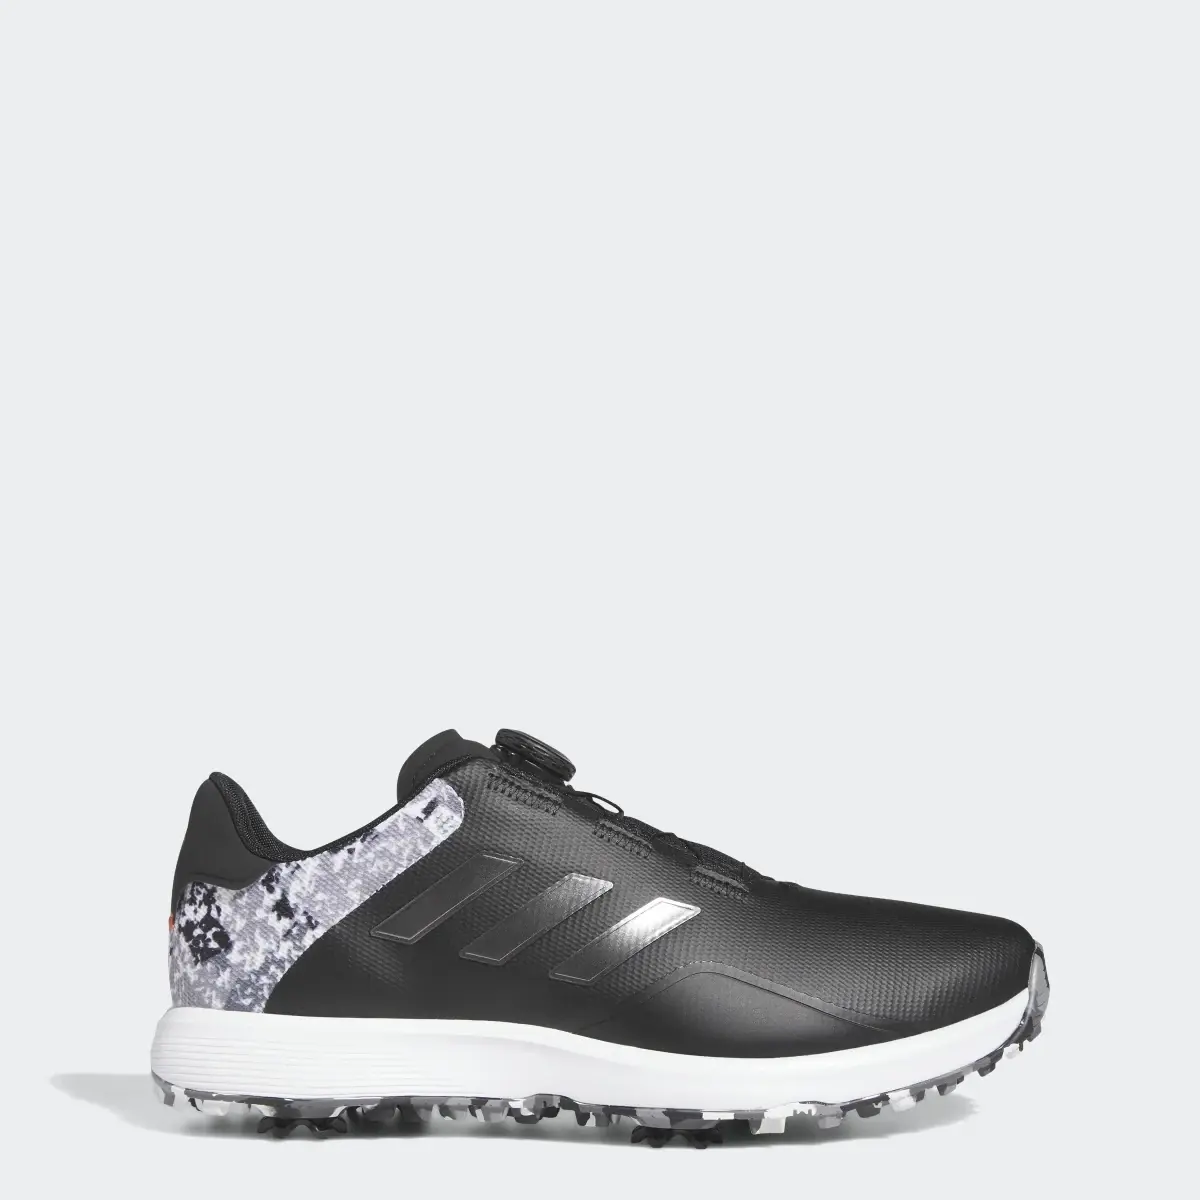 Adidas S2G BOA Wide Golf Shoes. 1